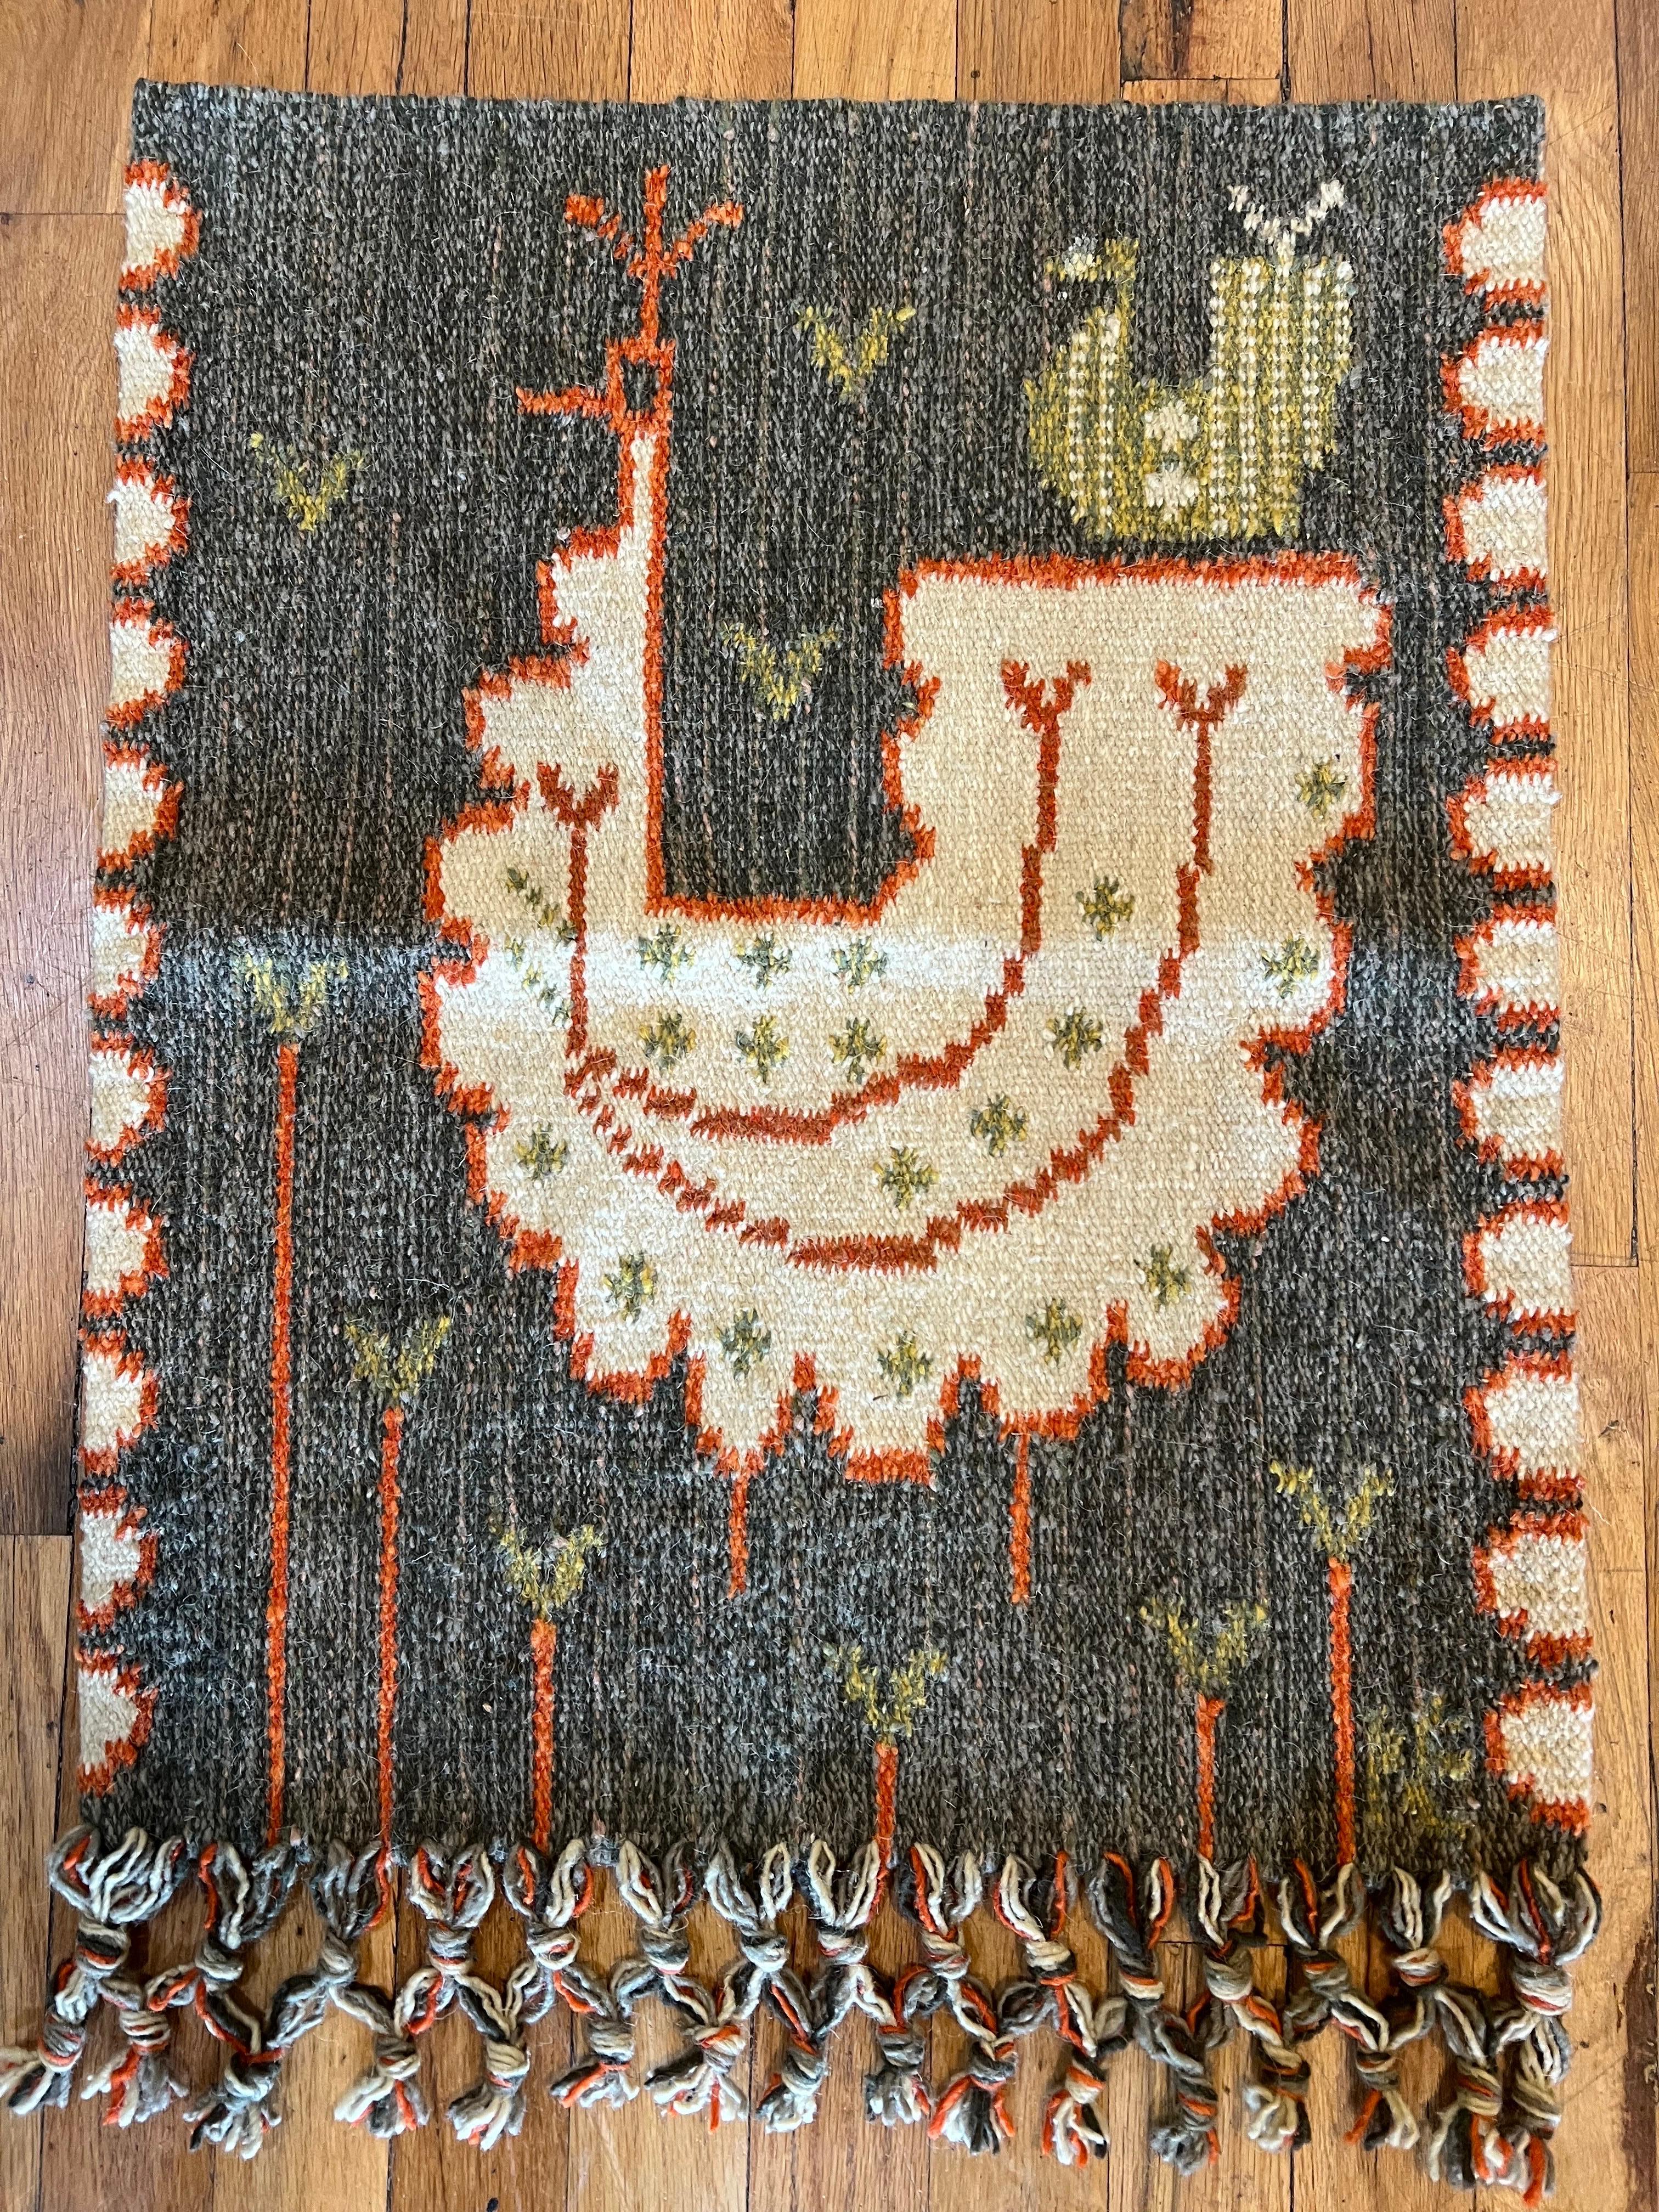 Transport yourself to mid-century Scandinavia with this exquisite Vintage Wall Carpet by Eva Nemeth, hailing from Hungary. Crafted with meticulous attention to detail, this wool woven tapestry epitomizes the fusion of Hungarian craftsmanship with